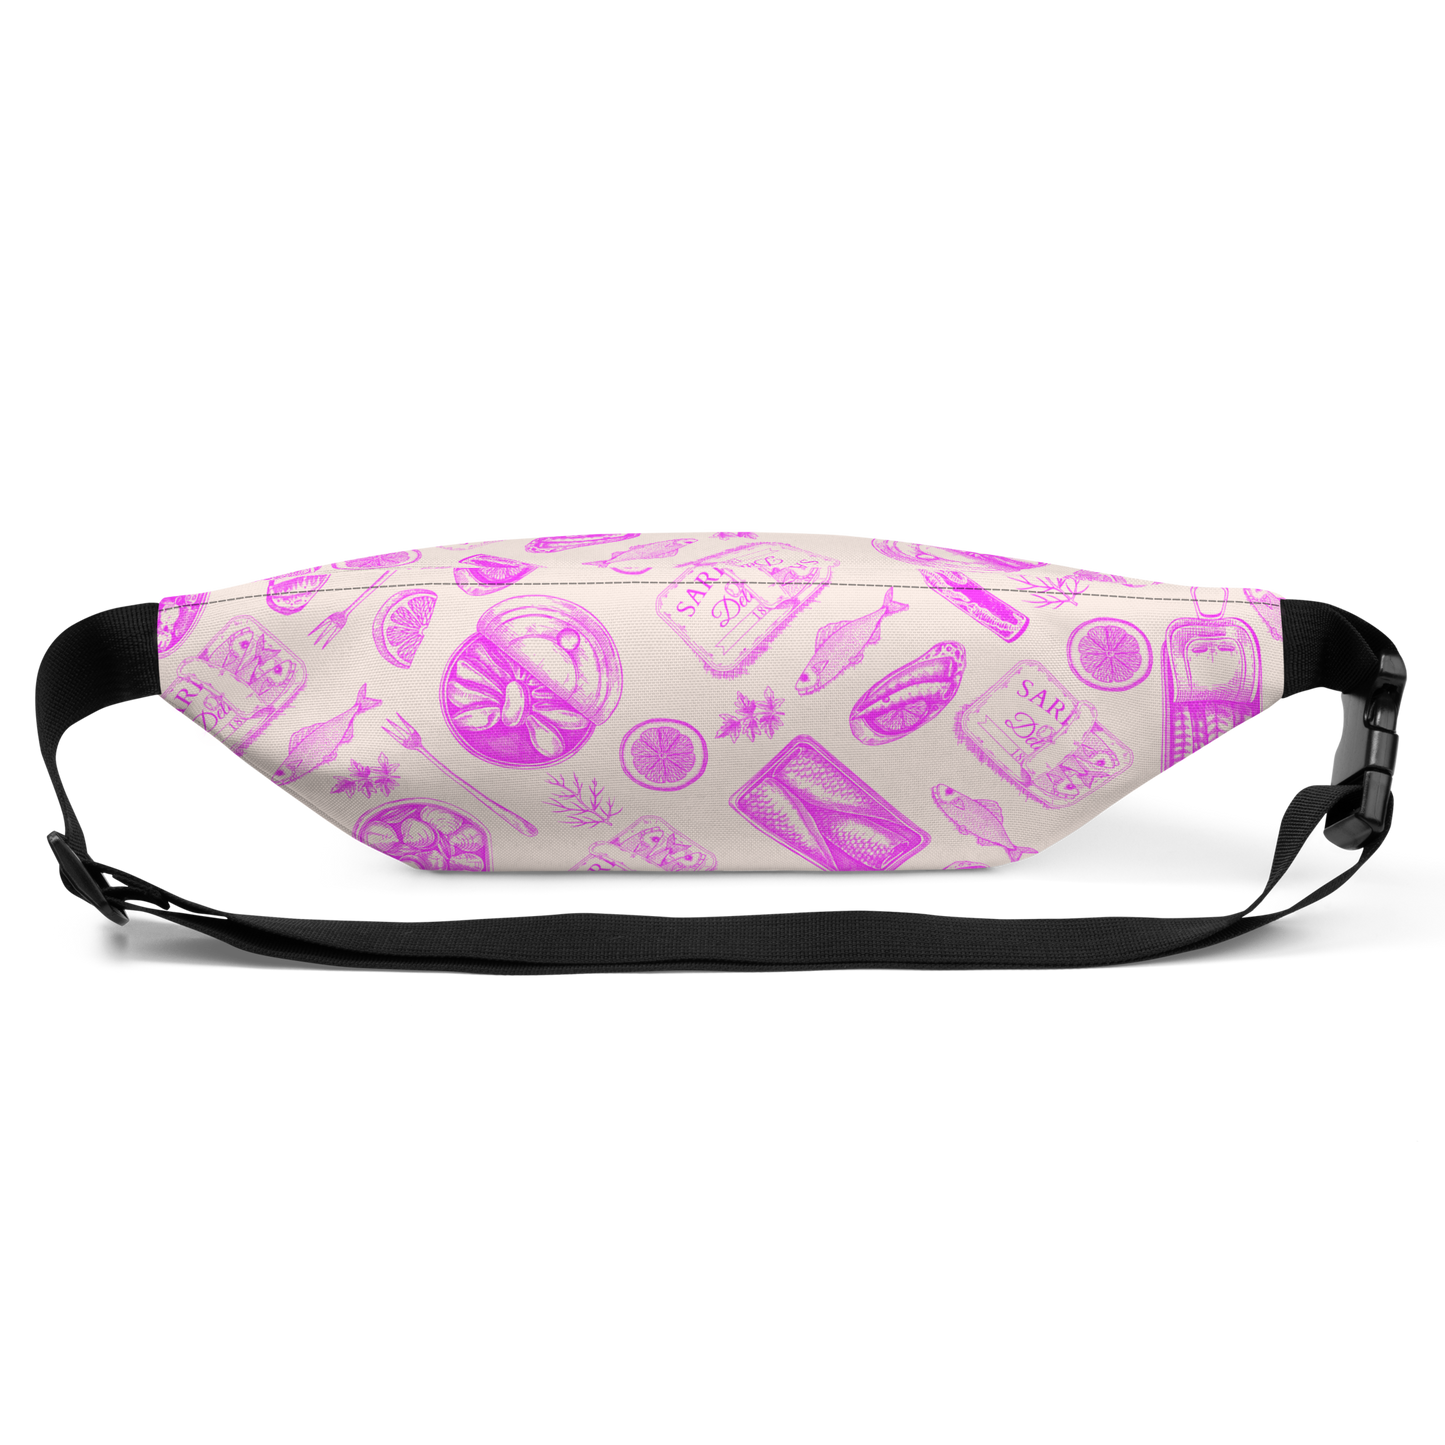 Tinned Fish Fanny Pack - Caribbean Pink by DECANTsf